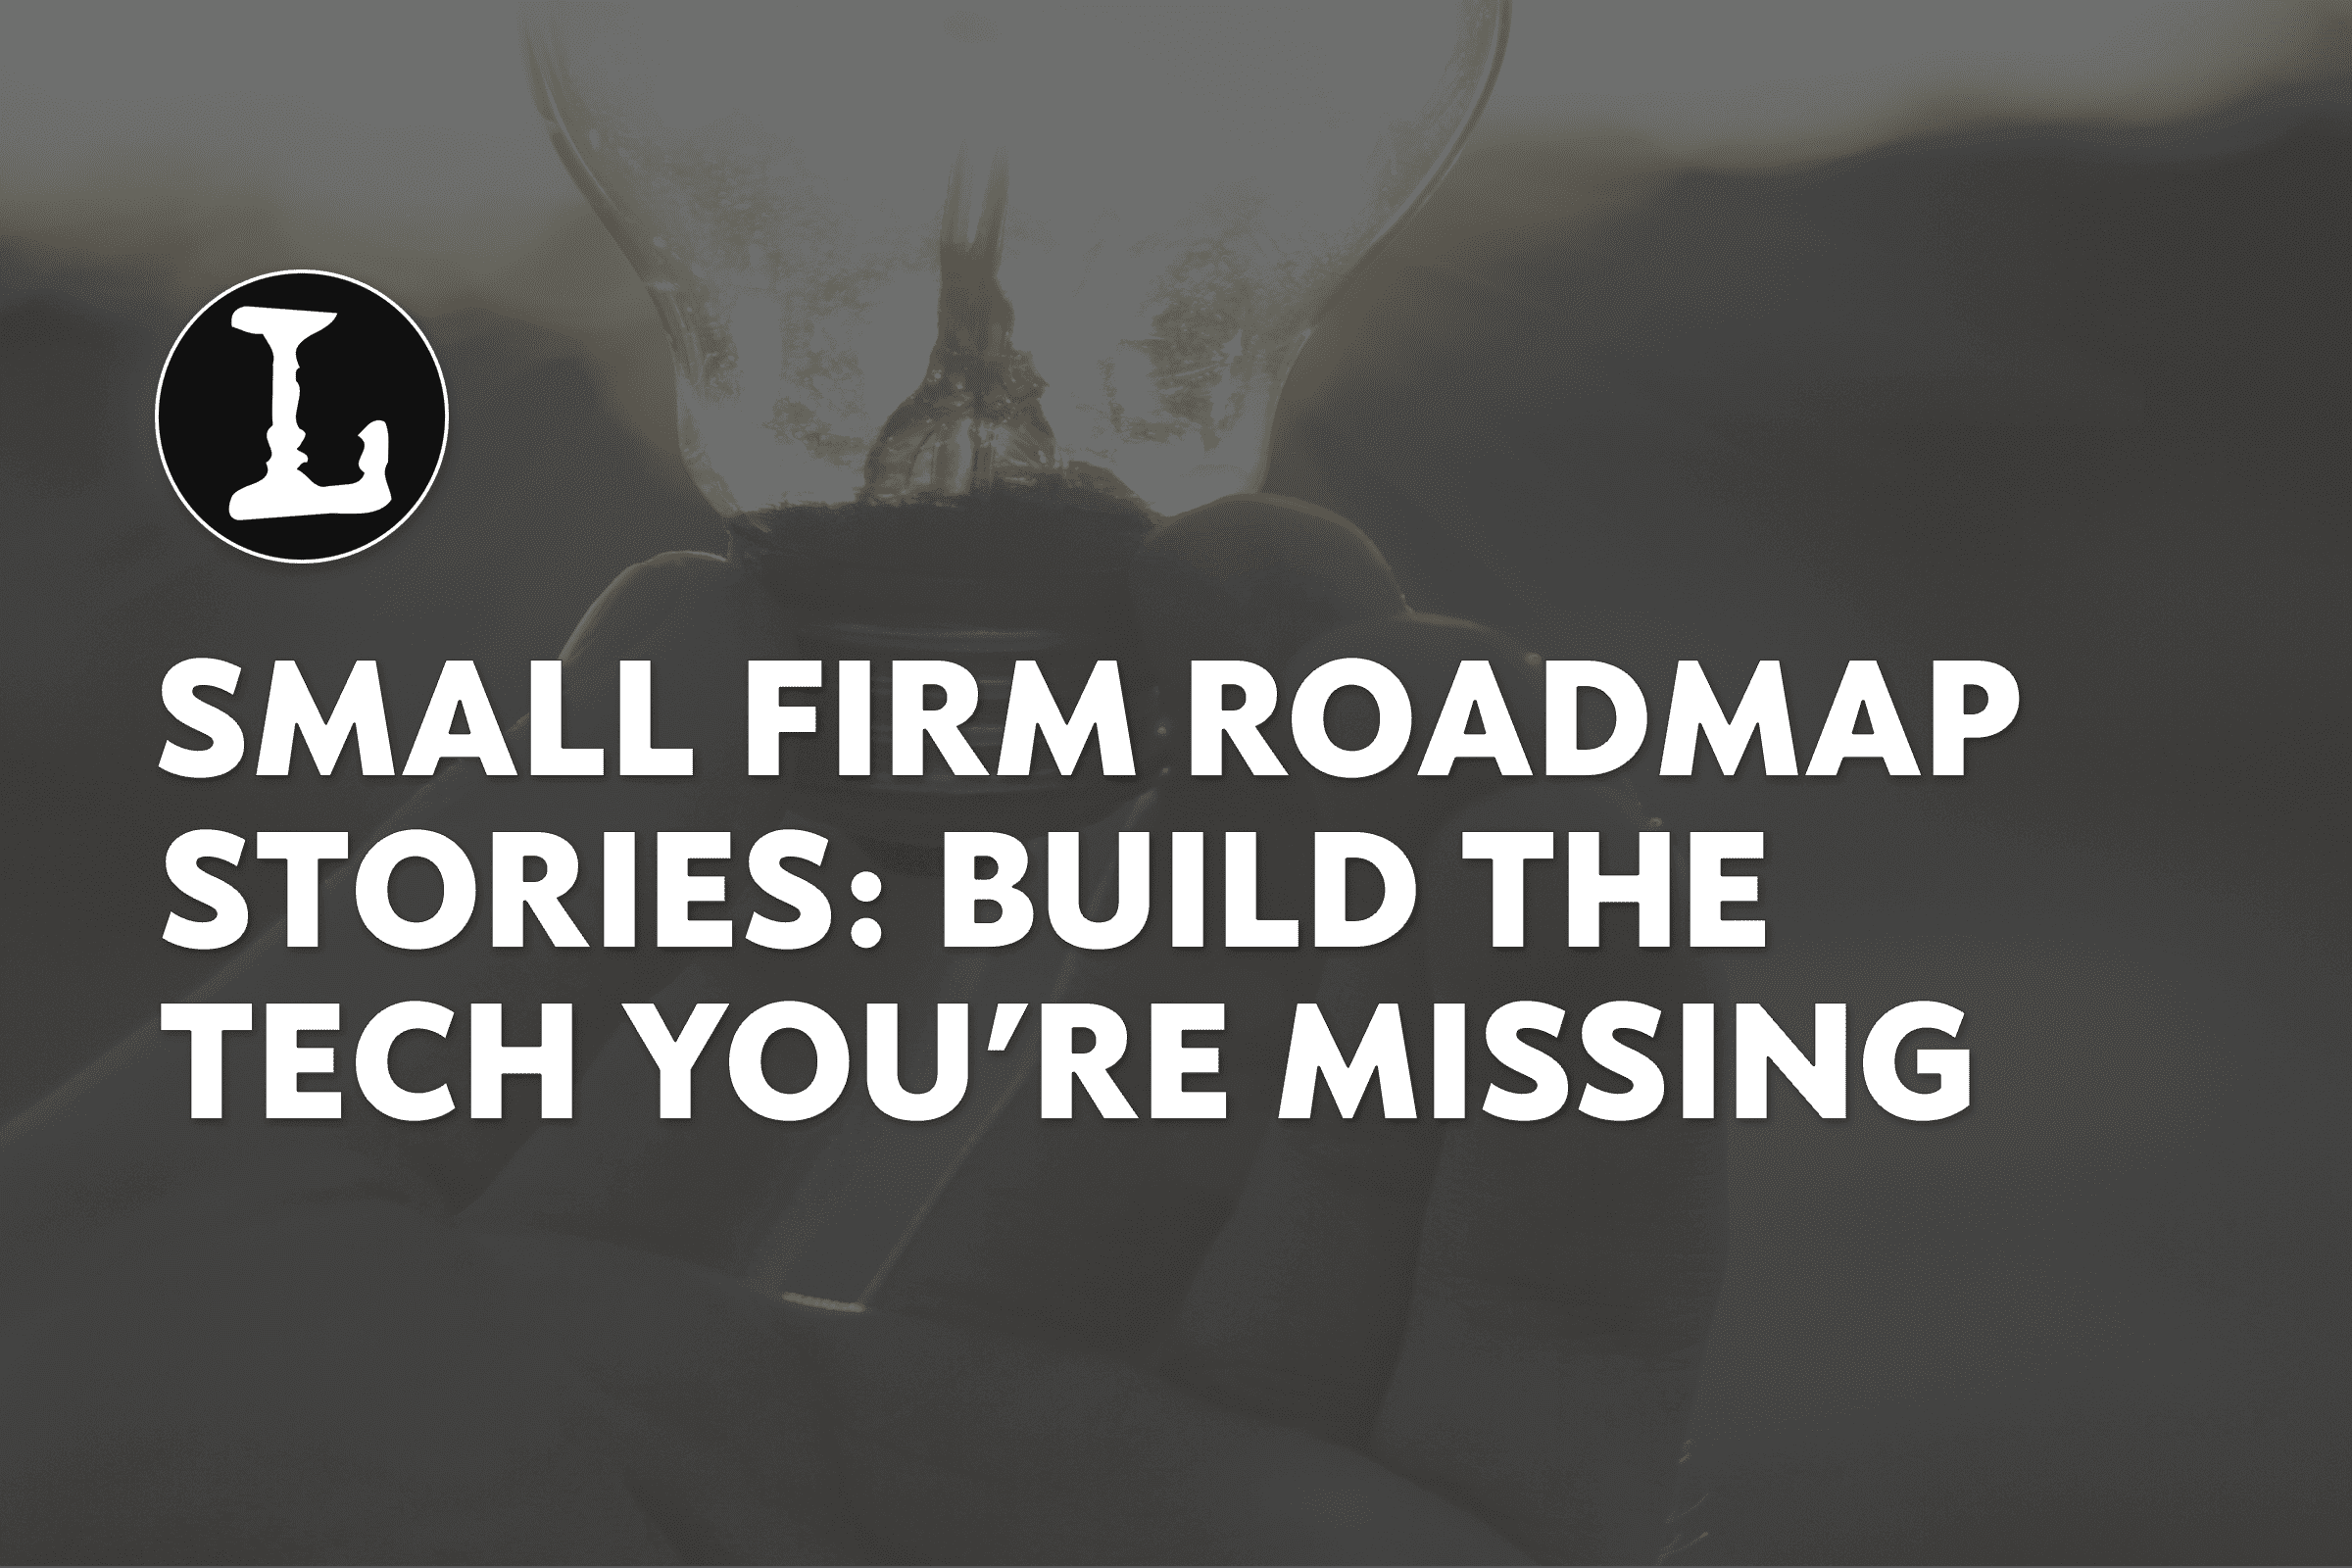 Small Firm Roadmap Stories: Build the Tech You're Missing